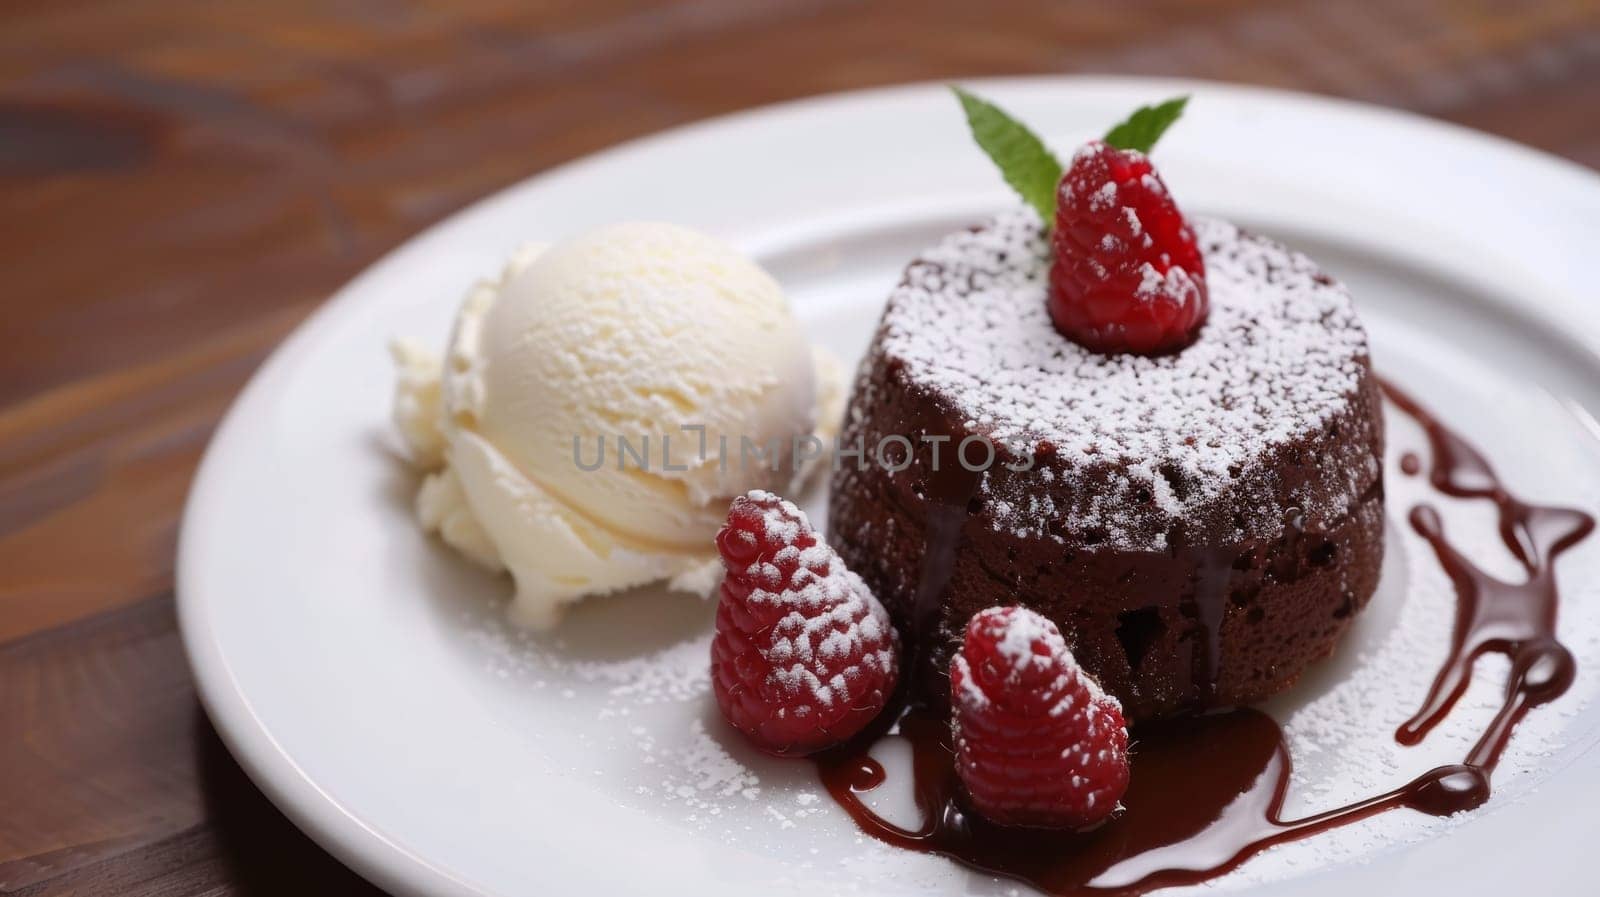 Decadent chocolate lava cake garnished with raspberries and served with vanilla ice cream on a white plate, perfect for a luxurious dessert. by sfinks